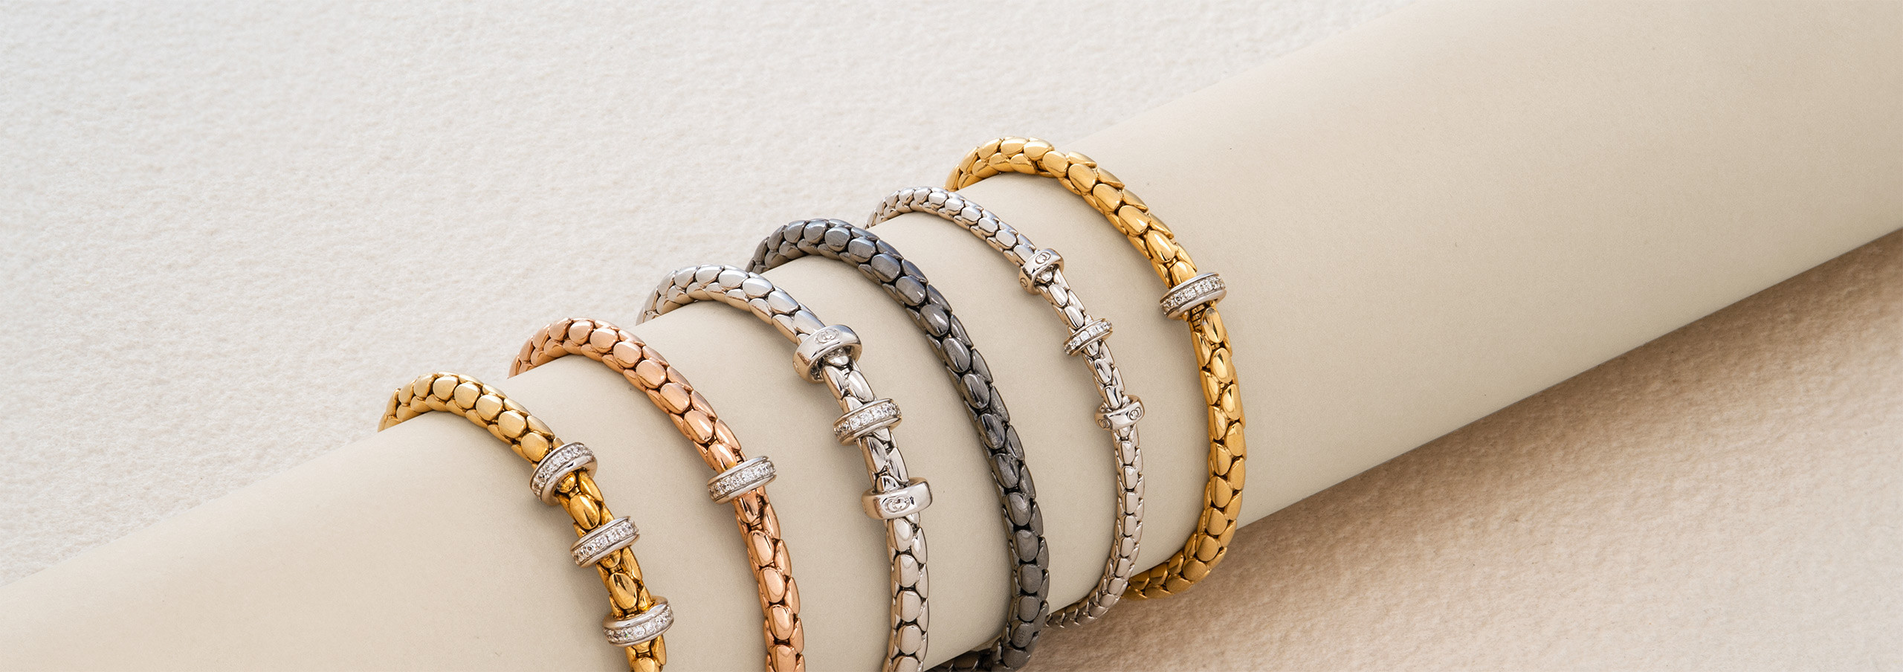 Chemiento Jewellery Brand Bracelets made of 18k Gold Banner Image